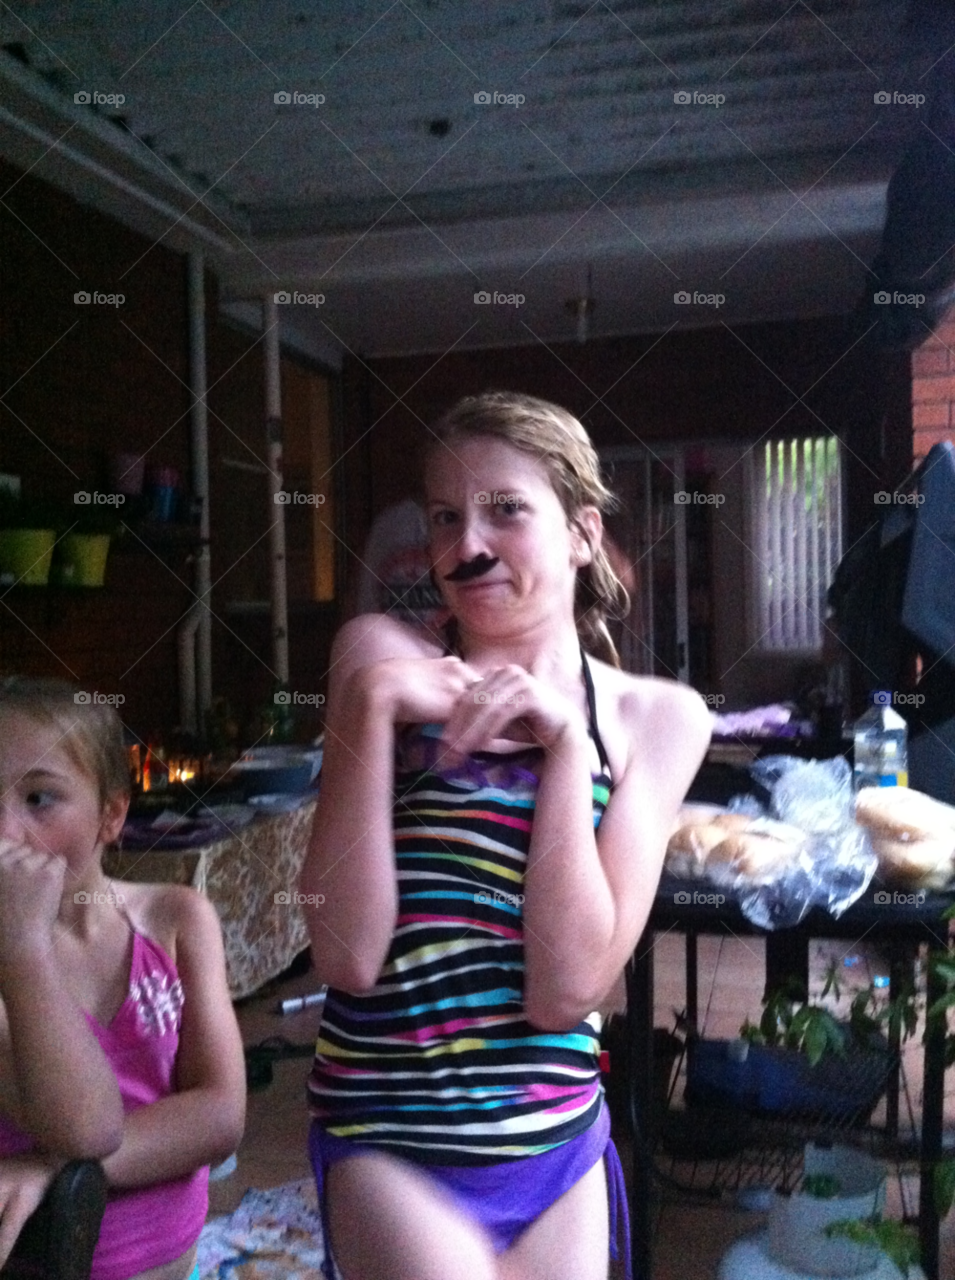 Moustache child. Child being silly